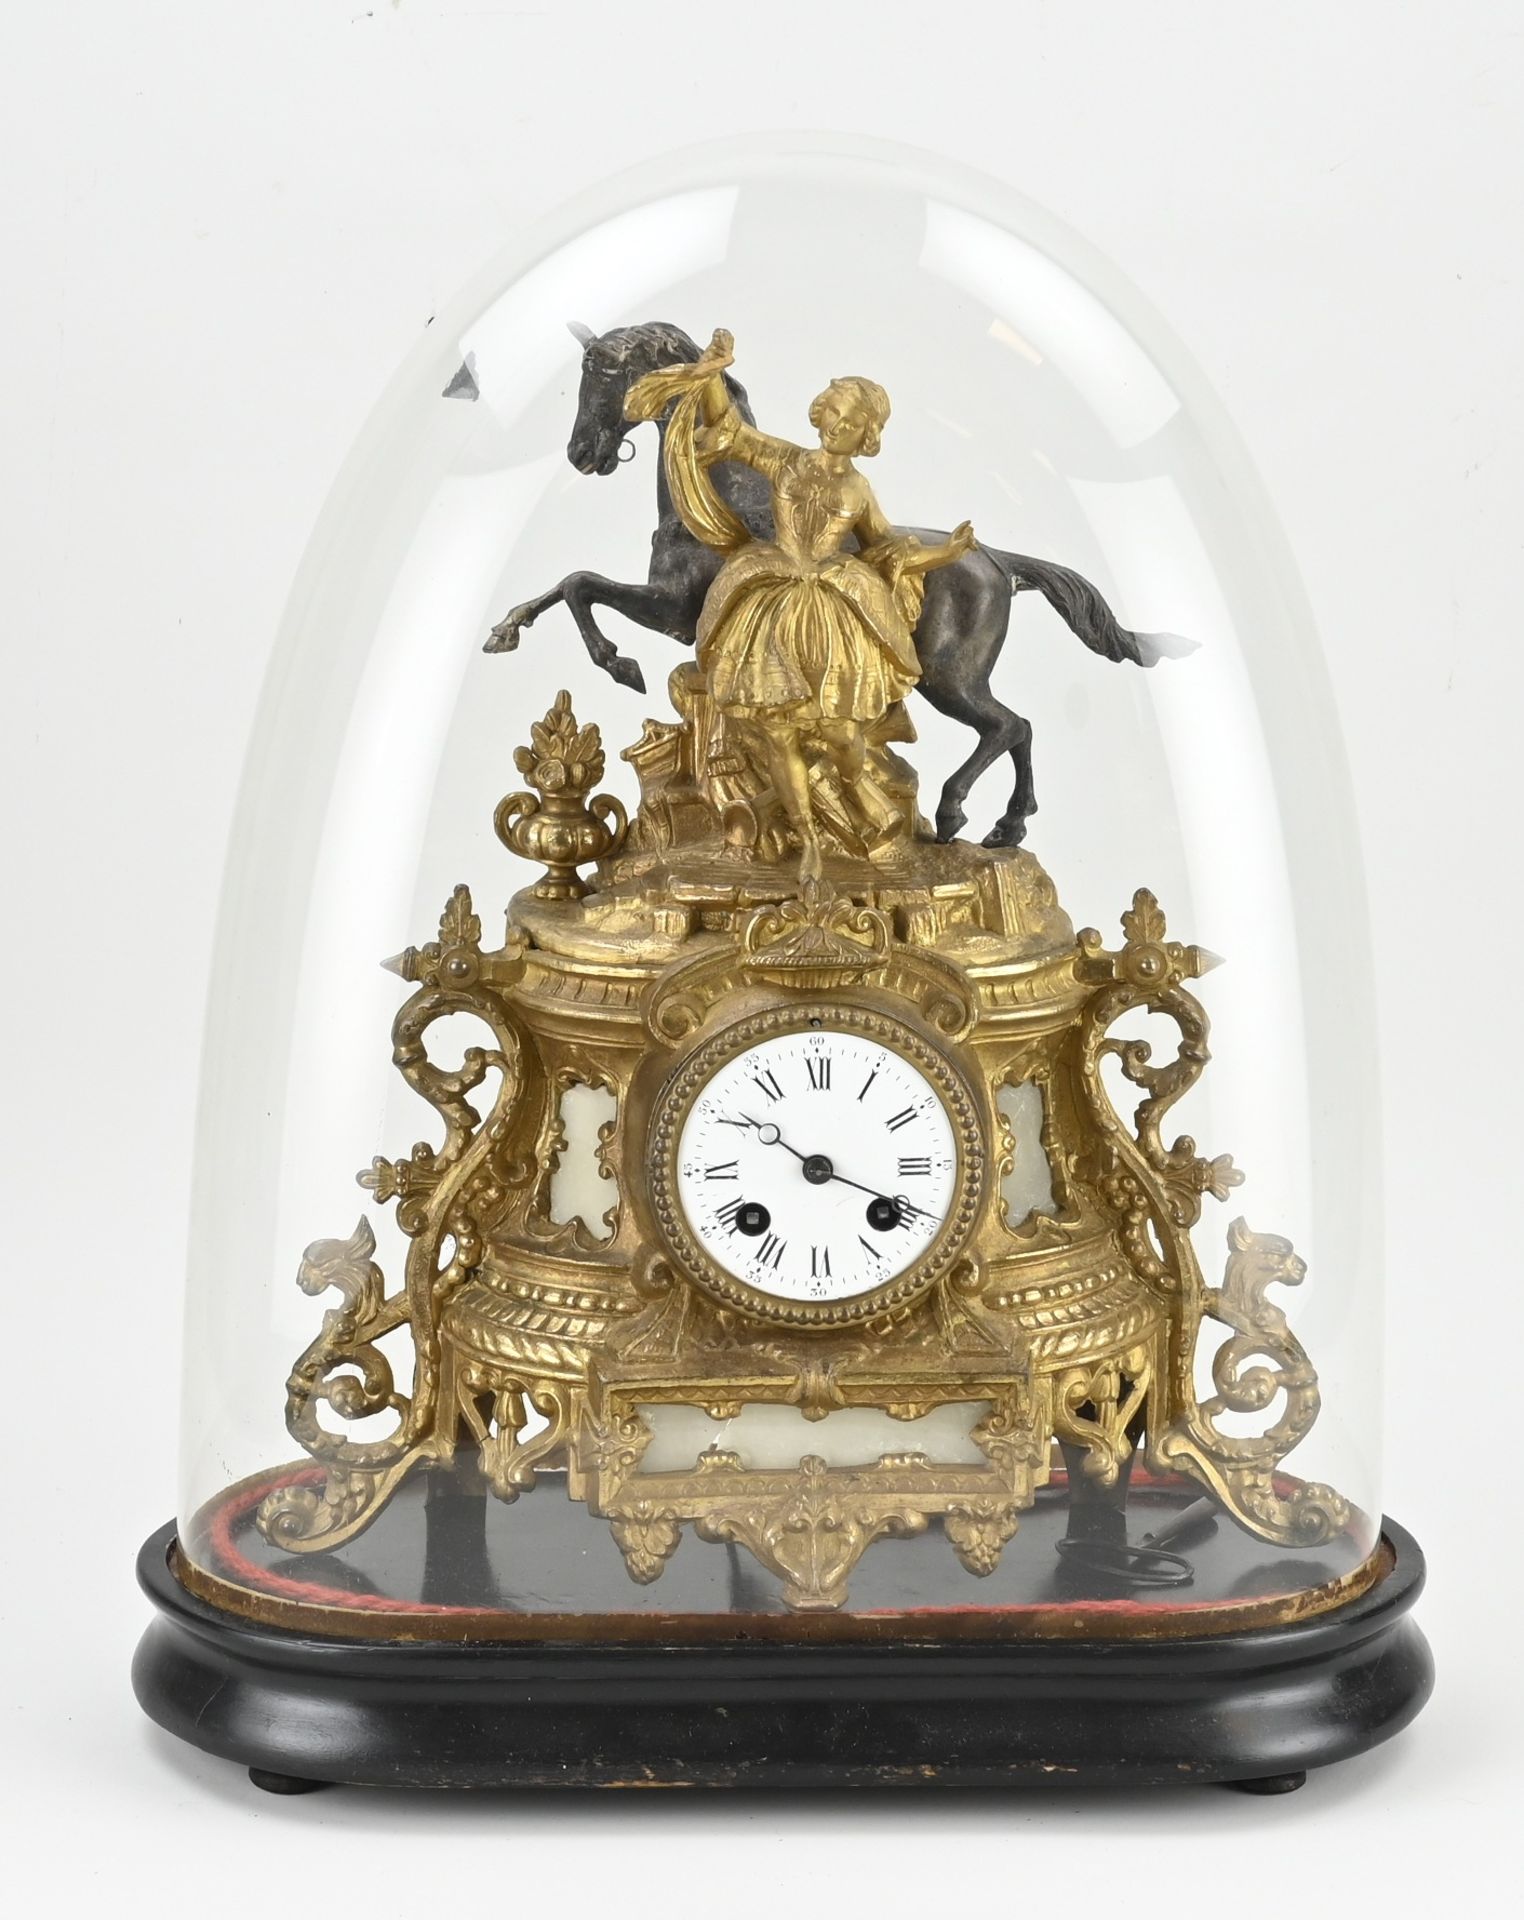 Antique French mantel clock + dome - Image 2 of 2